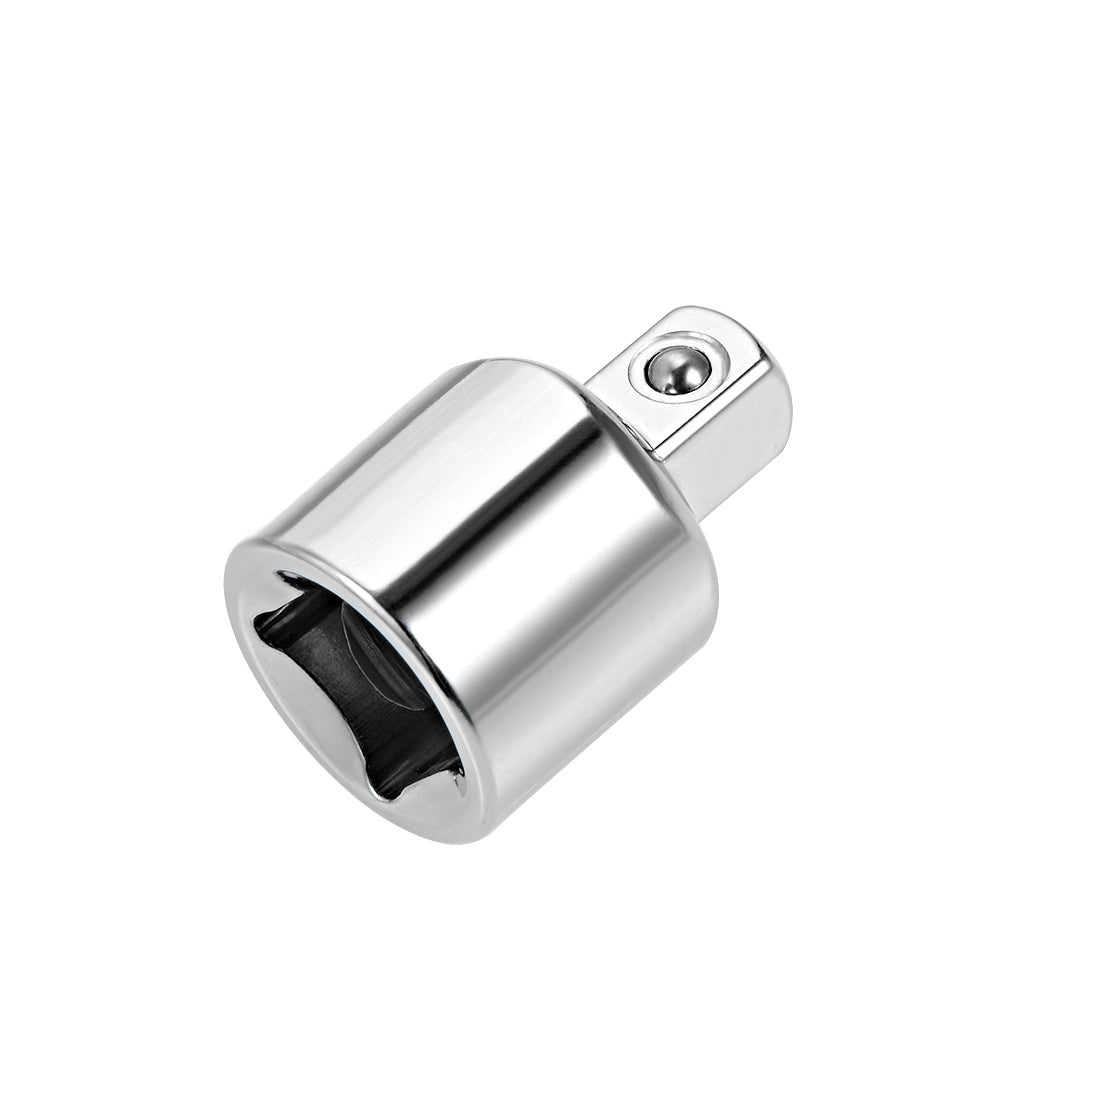 uxcell Uxcell 3/8 Inch Drive (F) x 1/4 Inch (M) Socket Reducer, Female to Male, Cr-V (Silver)